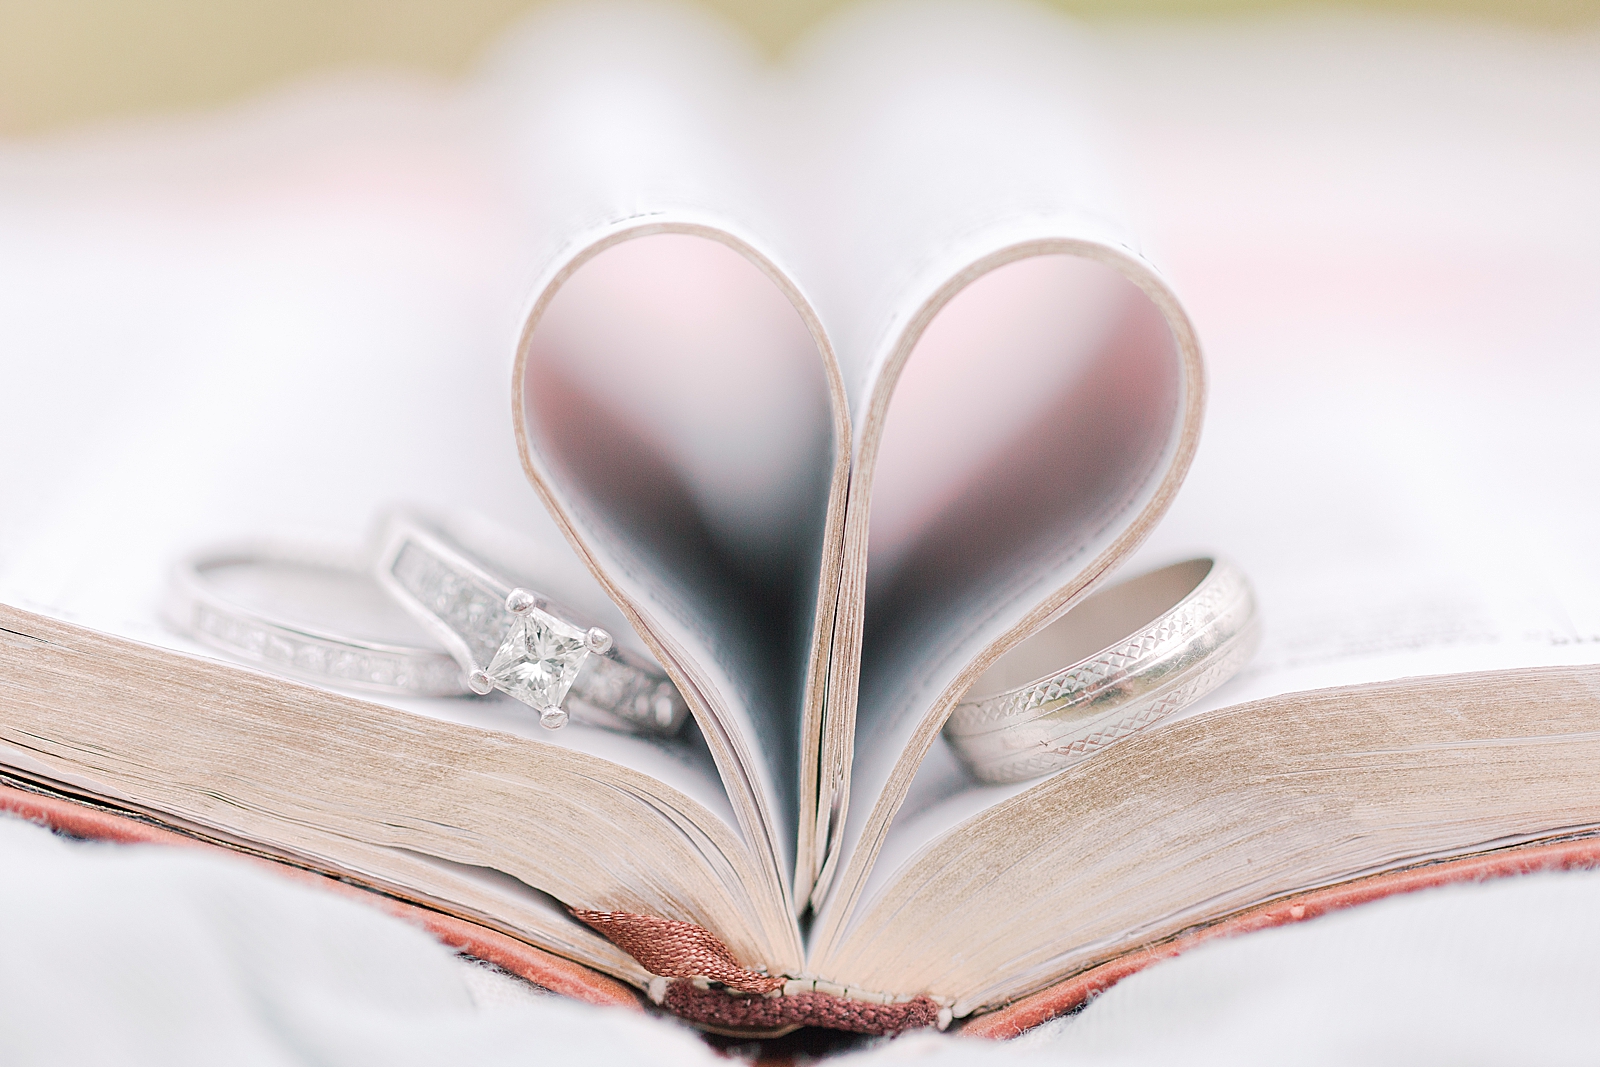 Asheville Anniversary Session Wedding Rings in Bible with pages shaped like a heart Photo